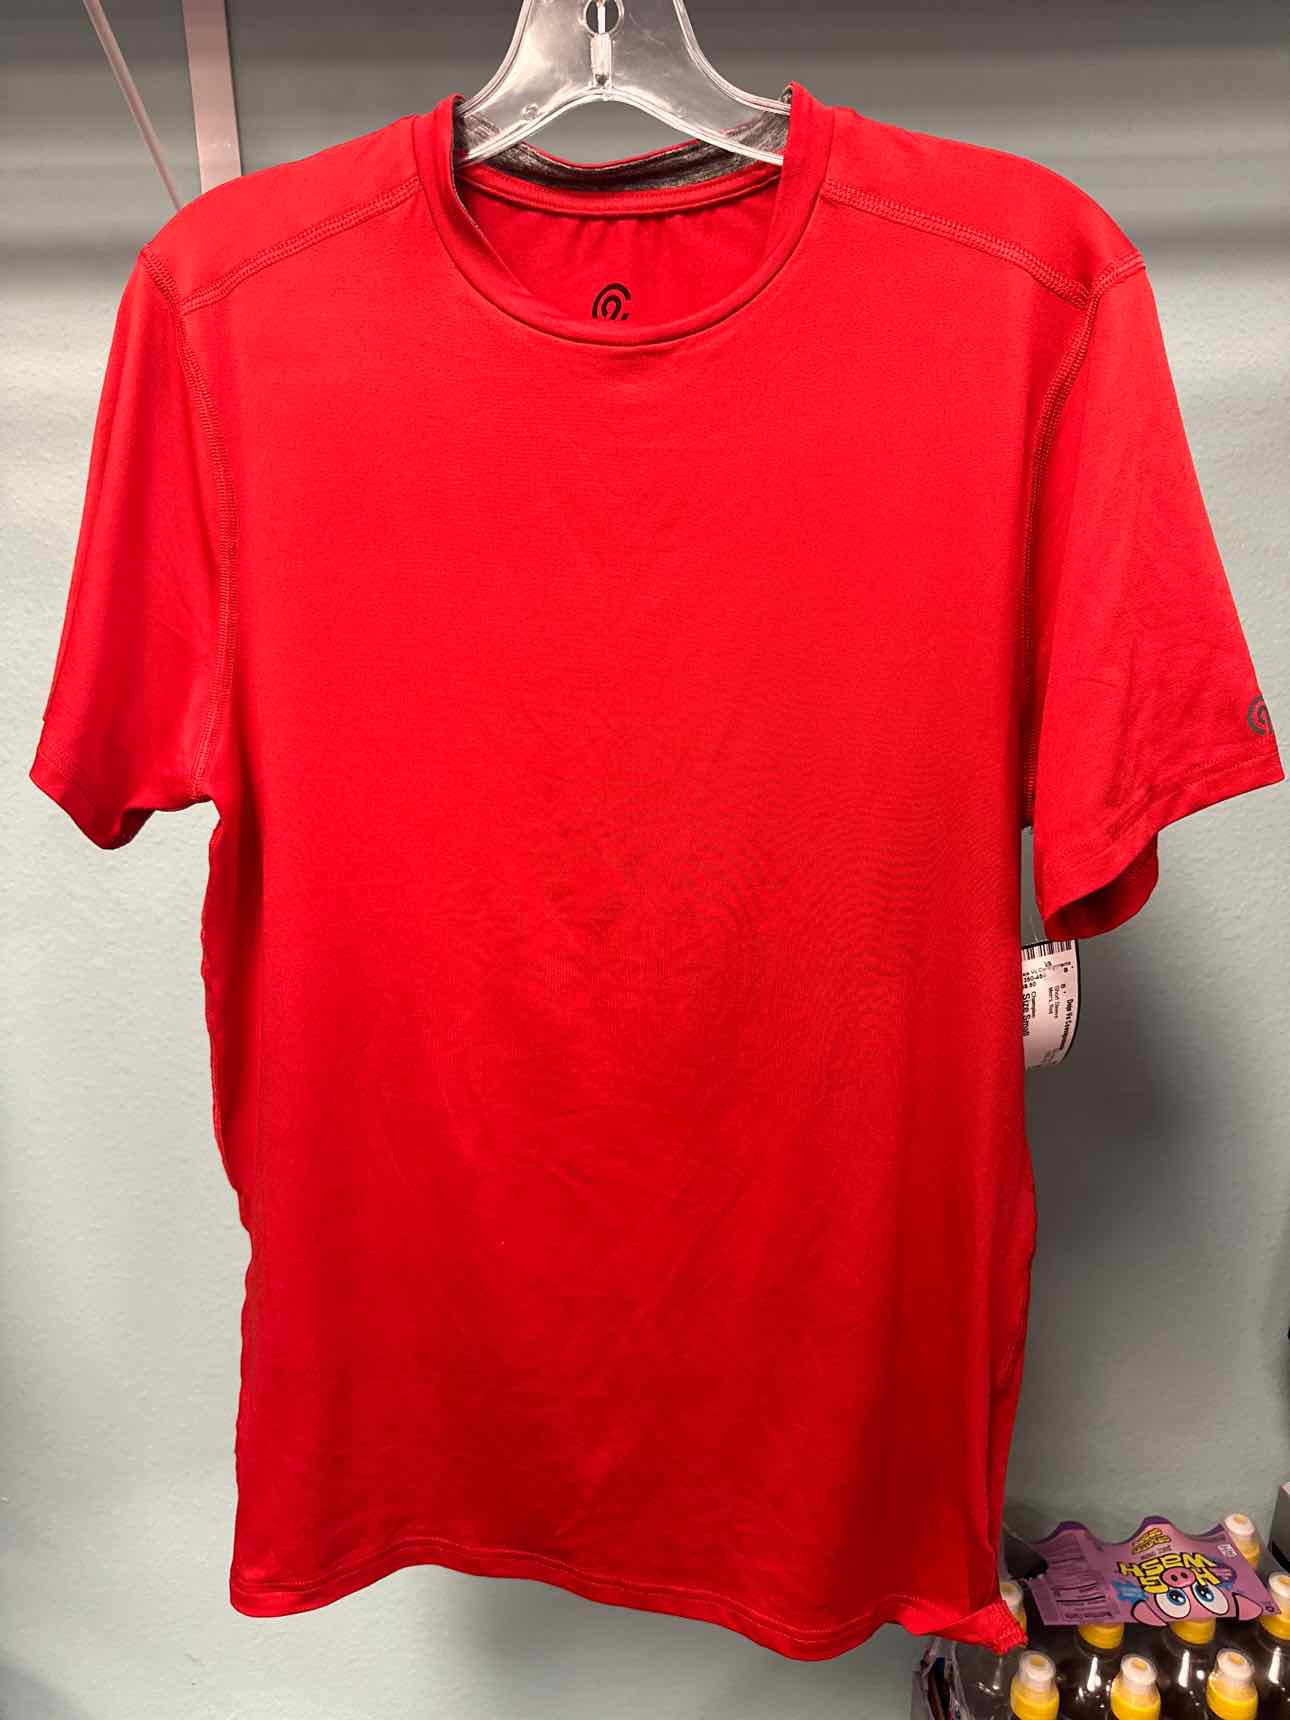 Men's Size Small Champion Red Short Sleeve